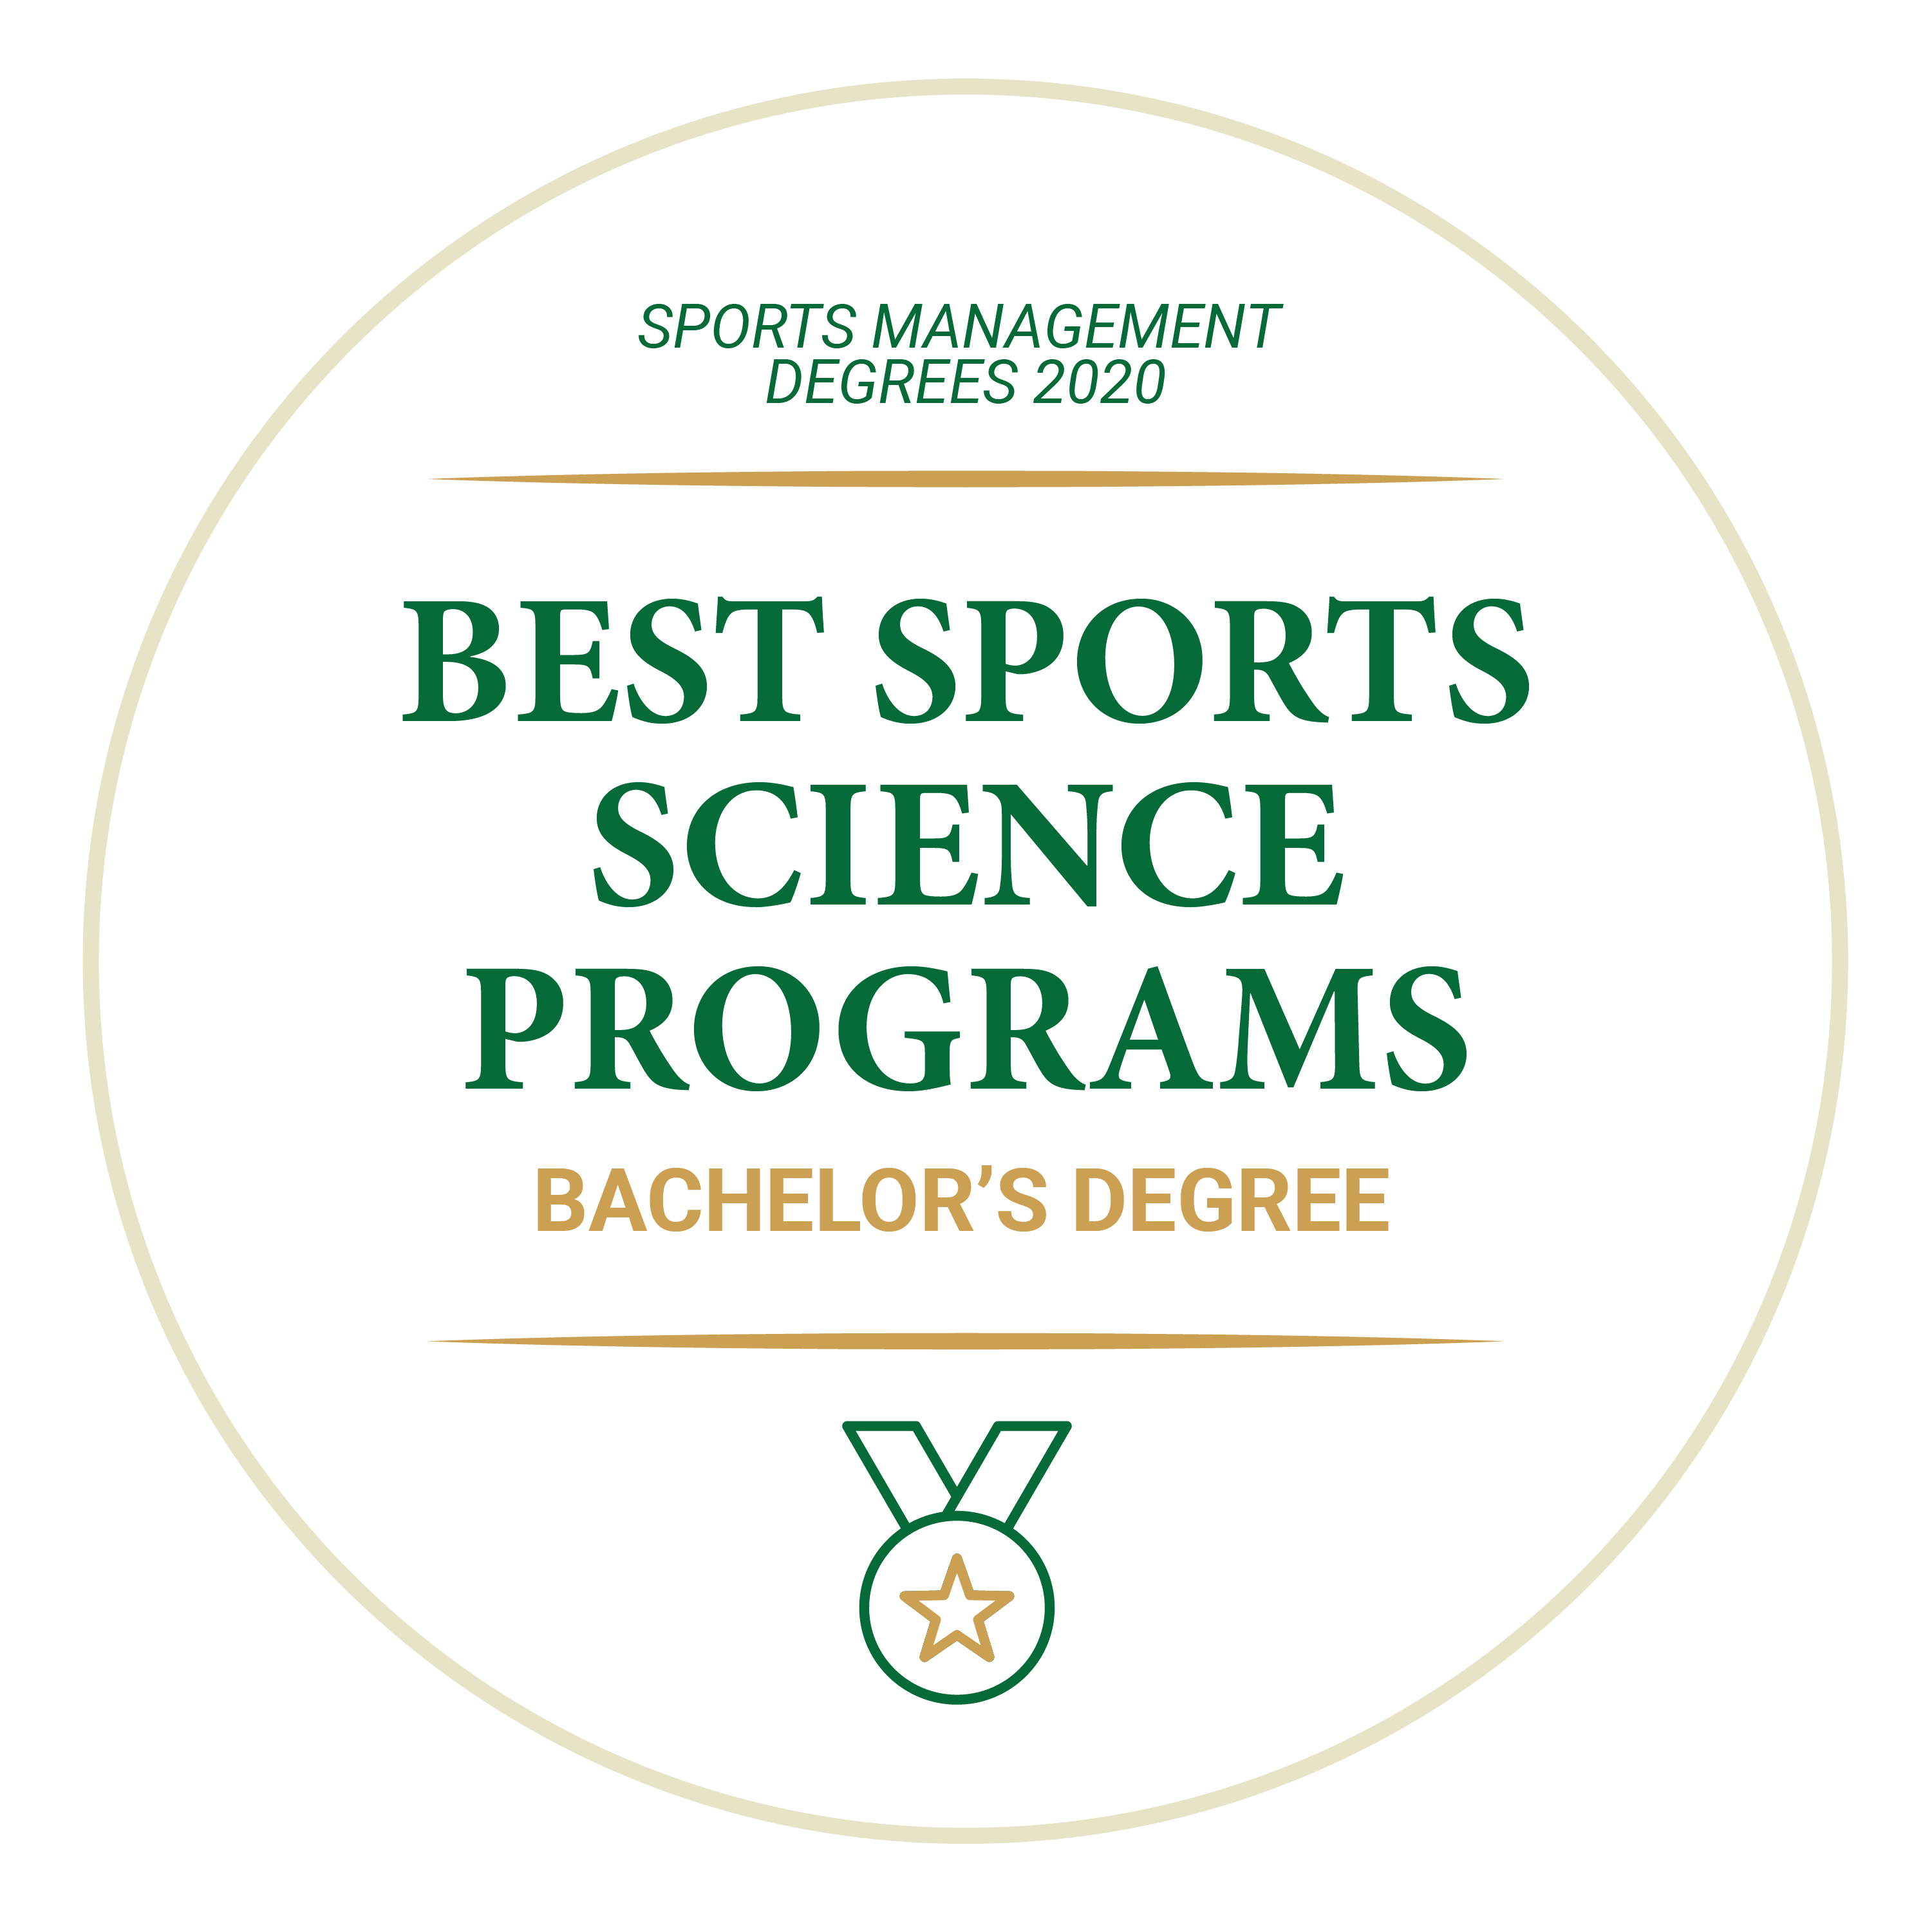 2020 Sports Management Degrees 2020 Best Sports Science Programs Bachelors Degree